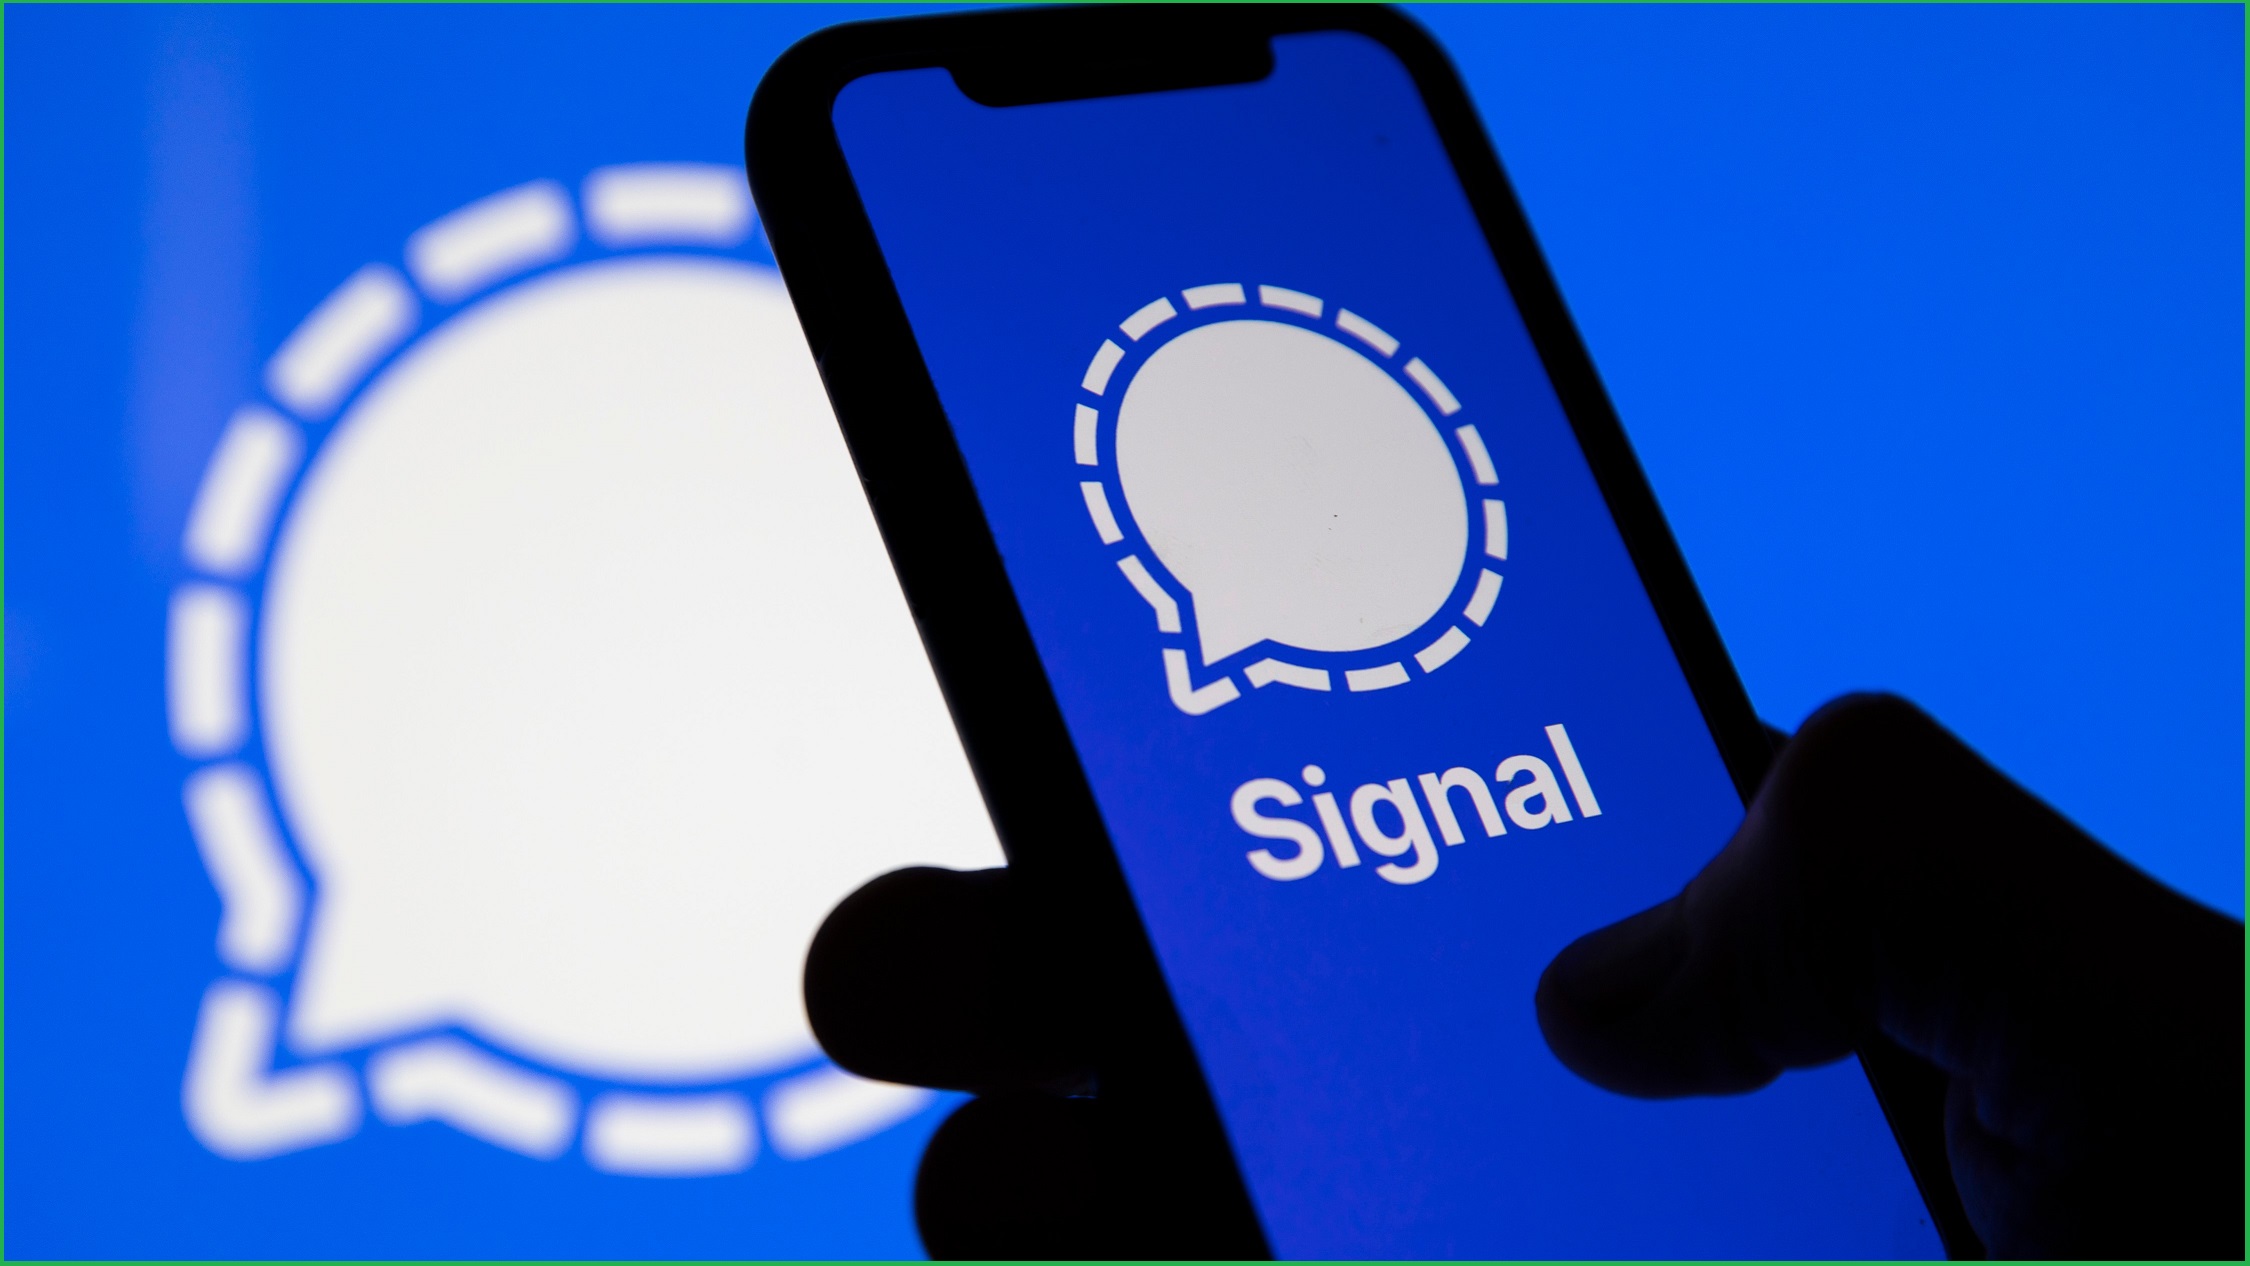 The blue signal logo on a smartphone silhouette 